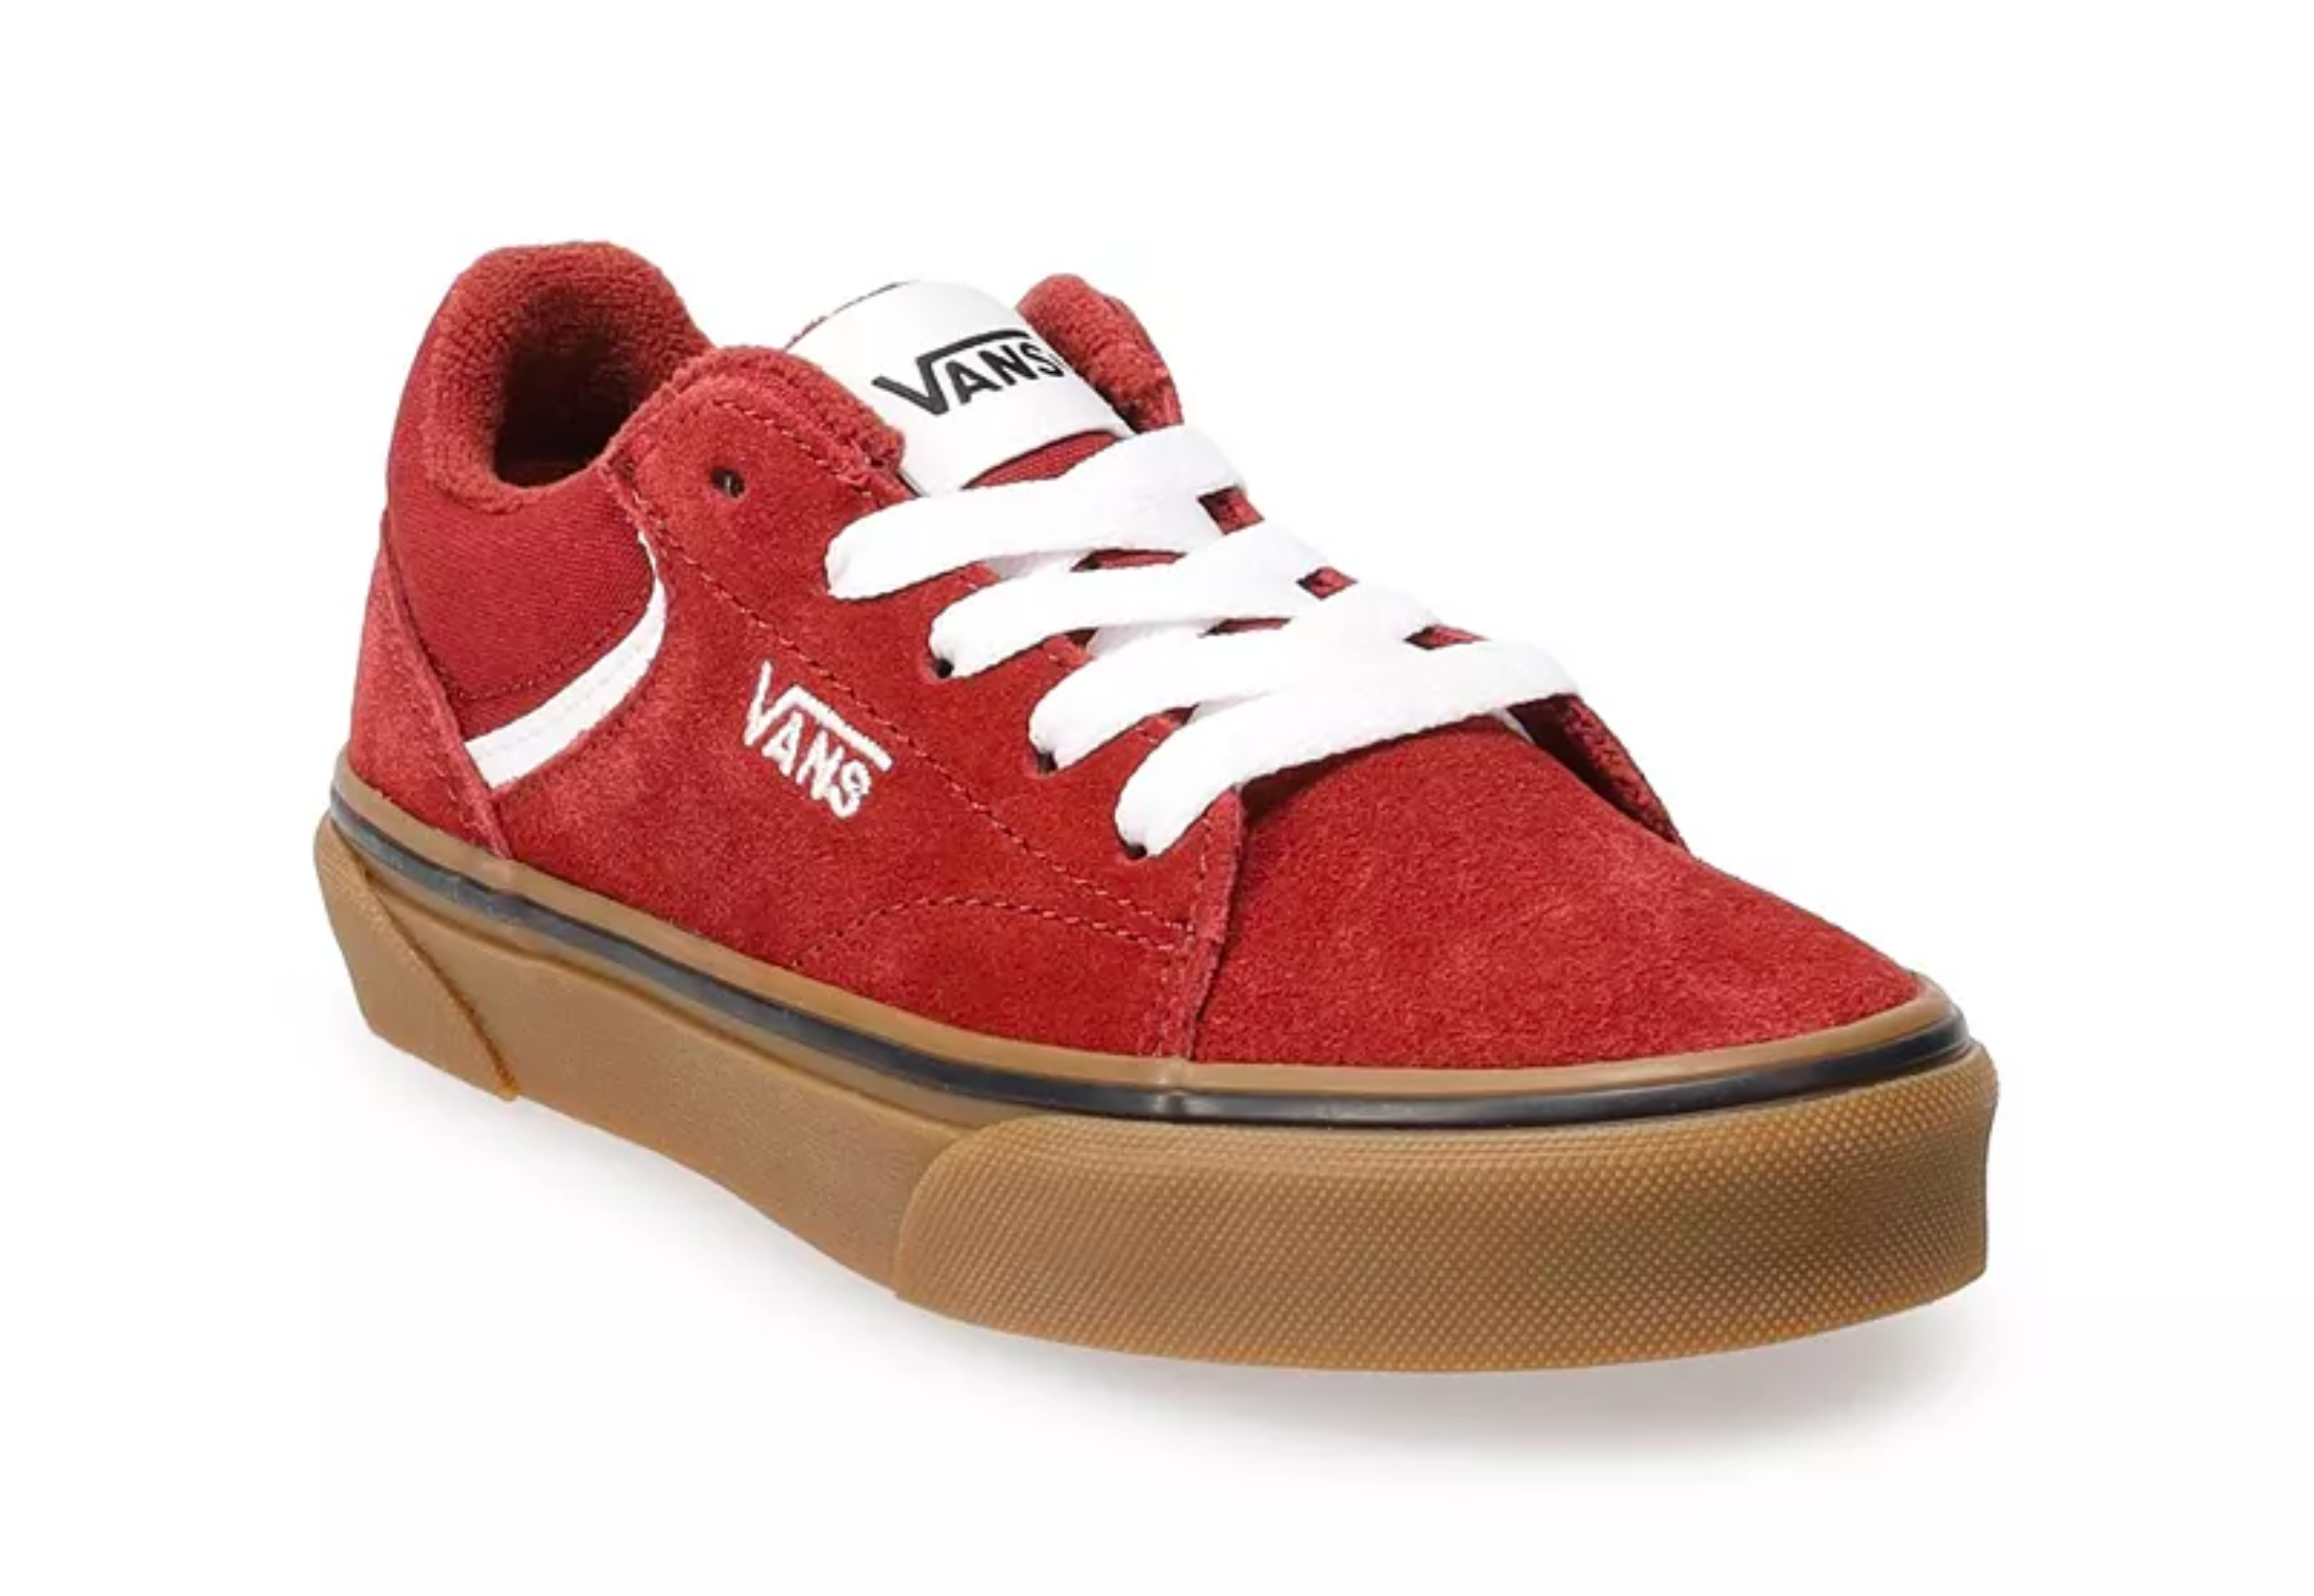 Vans Shoes the Family Start at Just $15 During Kohl's Labor Day Sale - The Krazy Coupon Lady